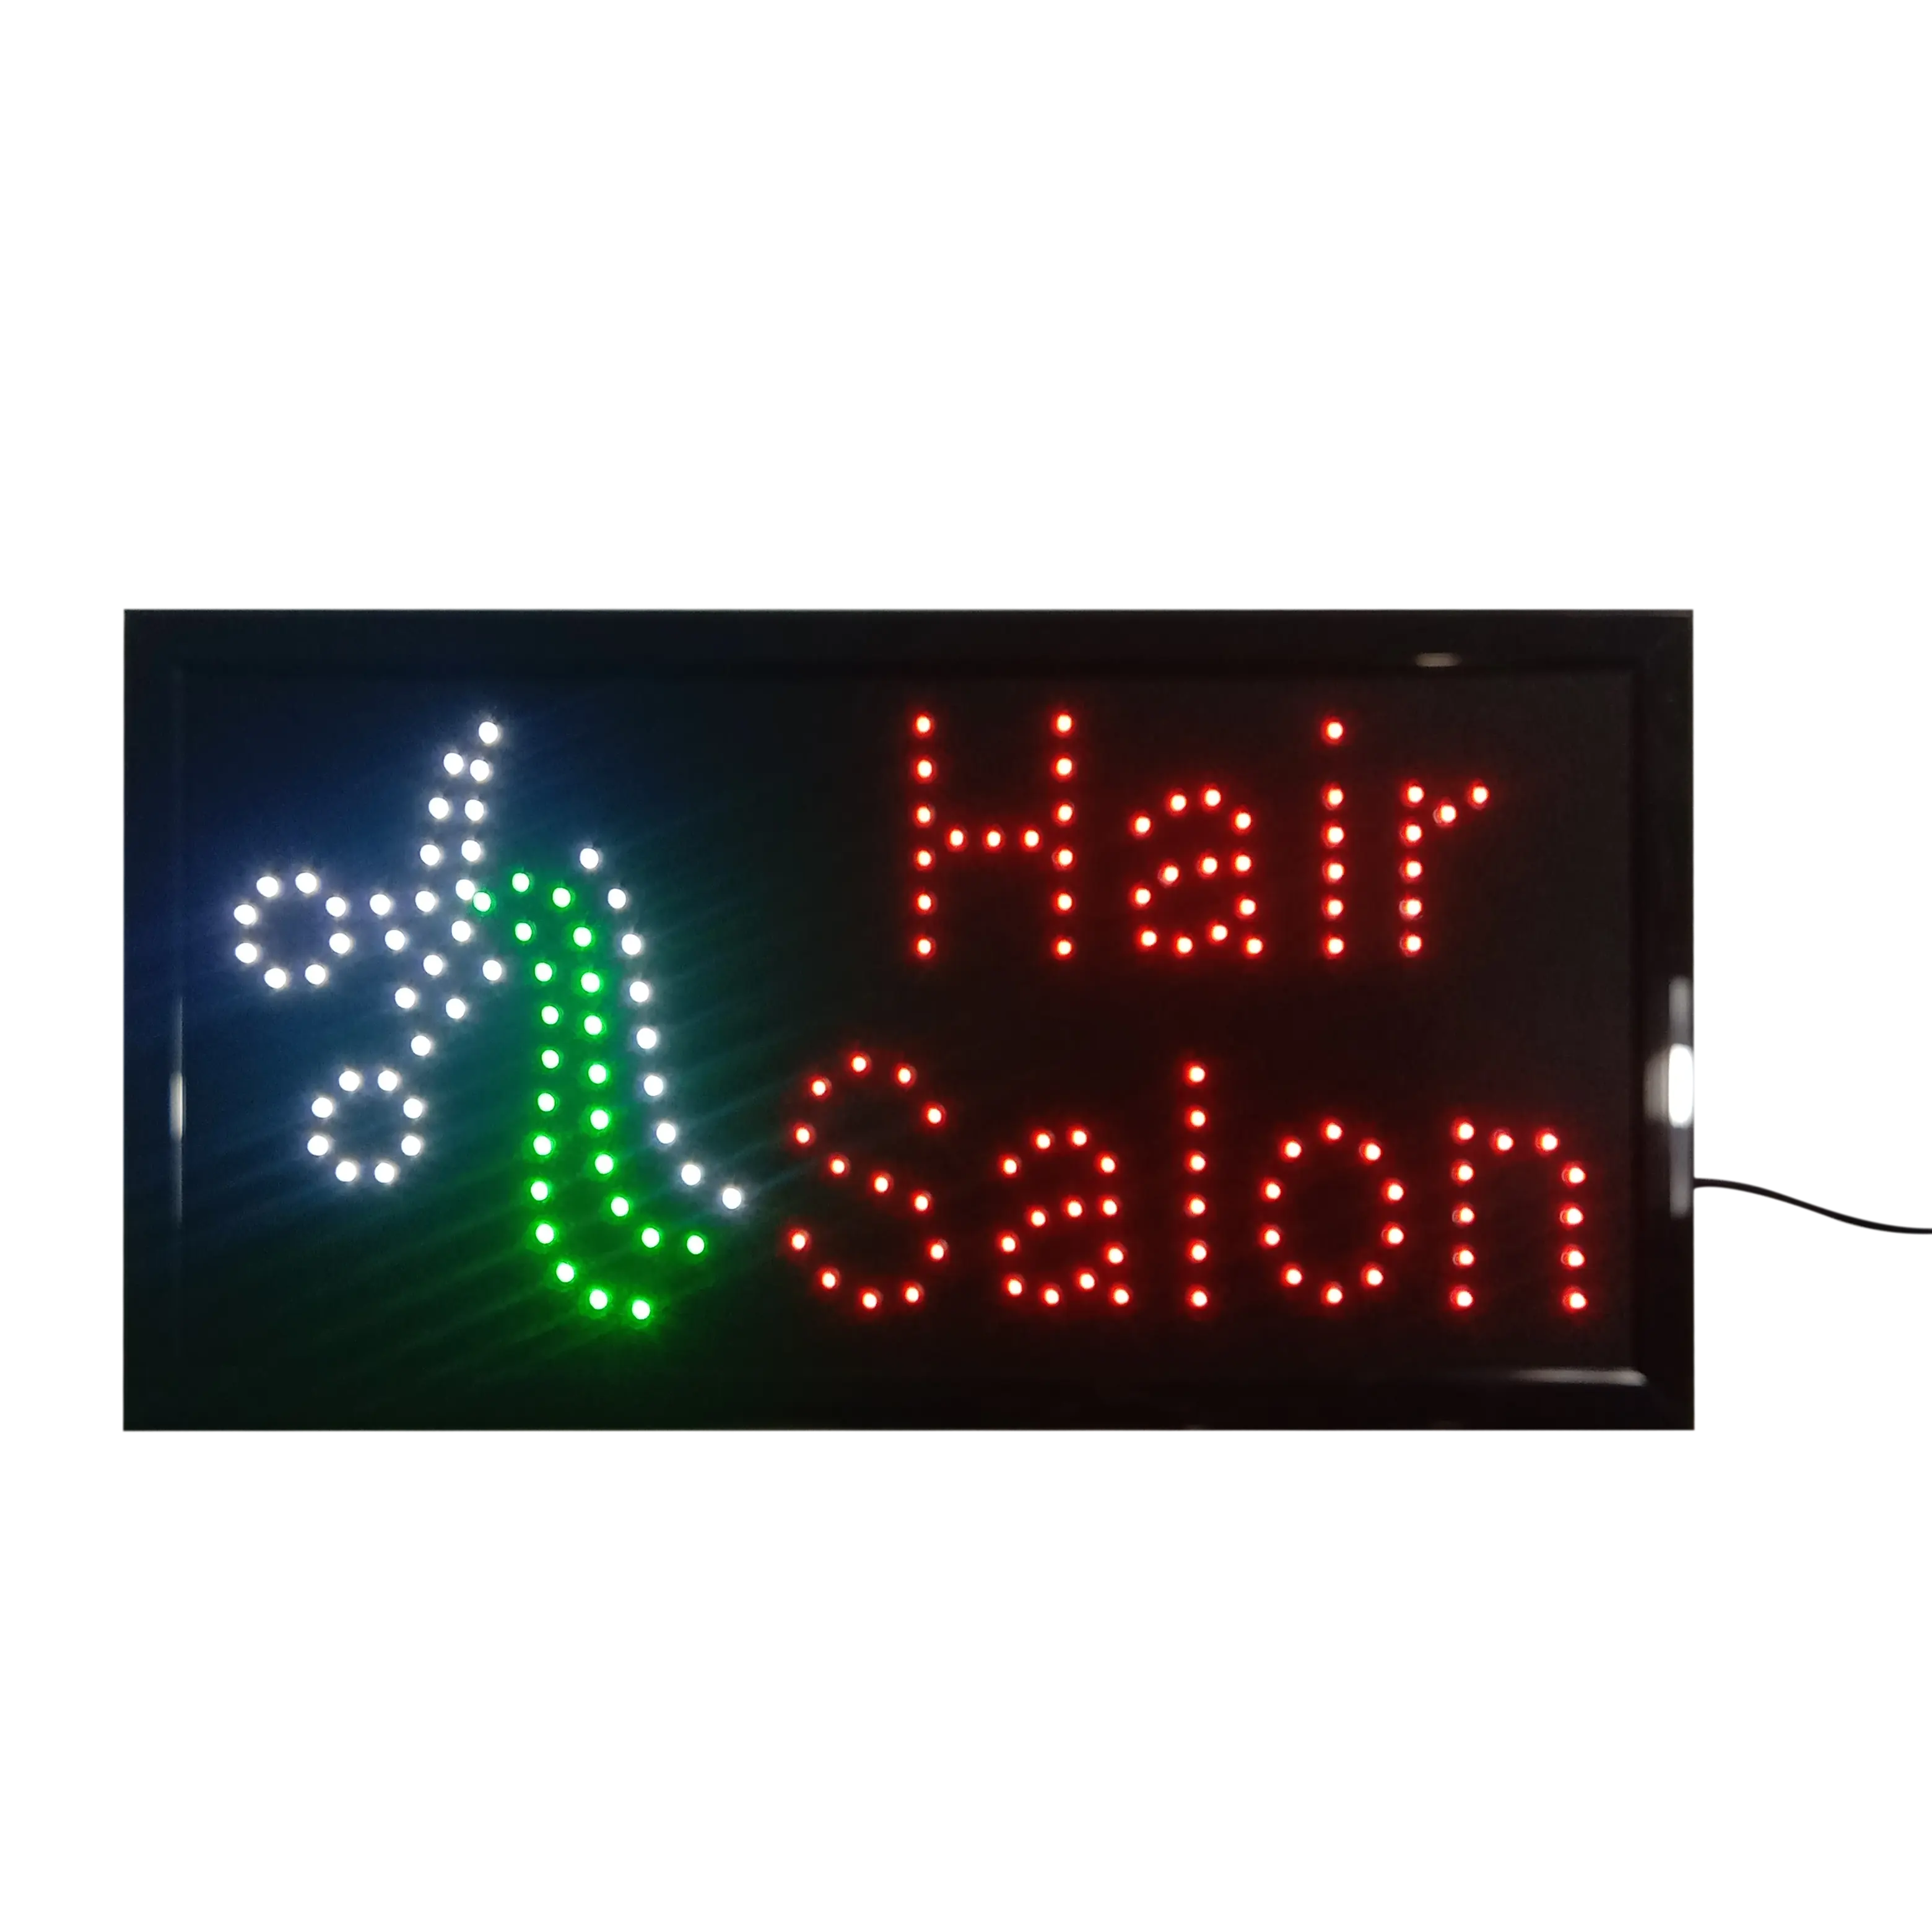 LED Barber Shop Open Advertisement Board,Business Electric Display light Neon Sign Hair Salon Shop